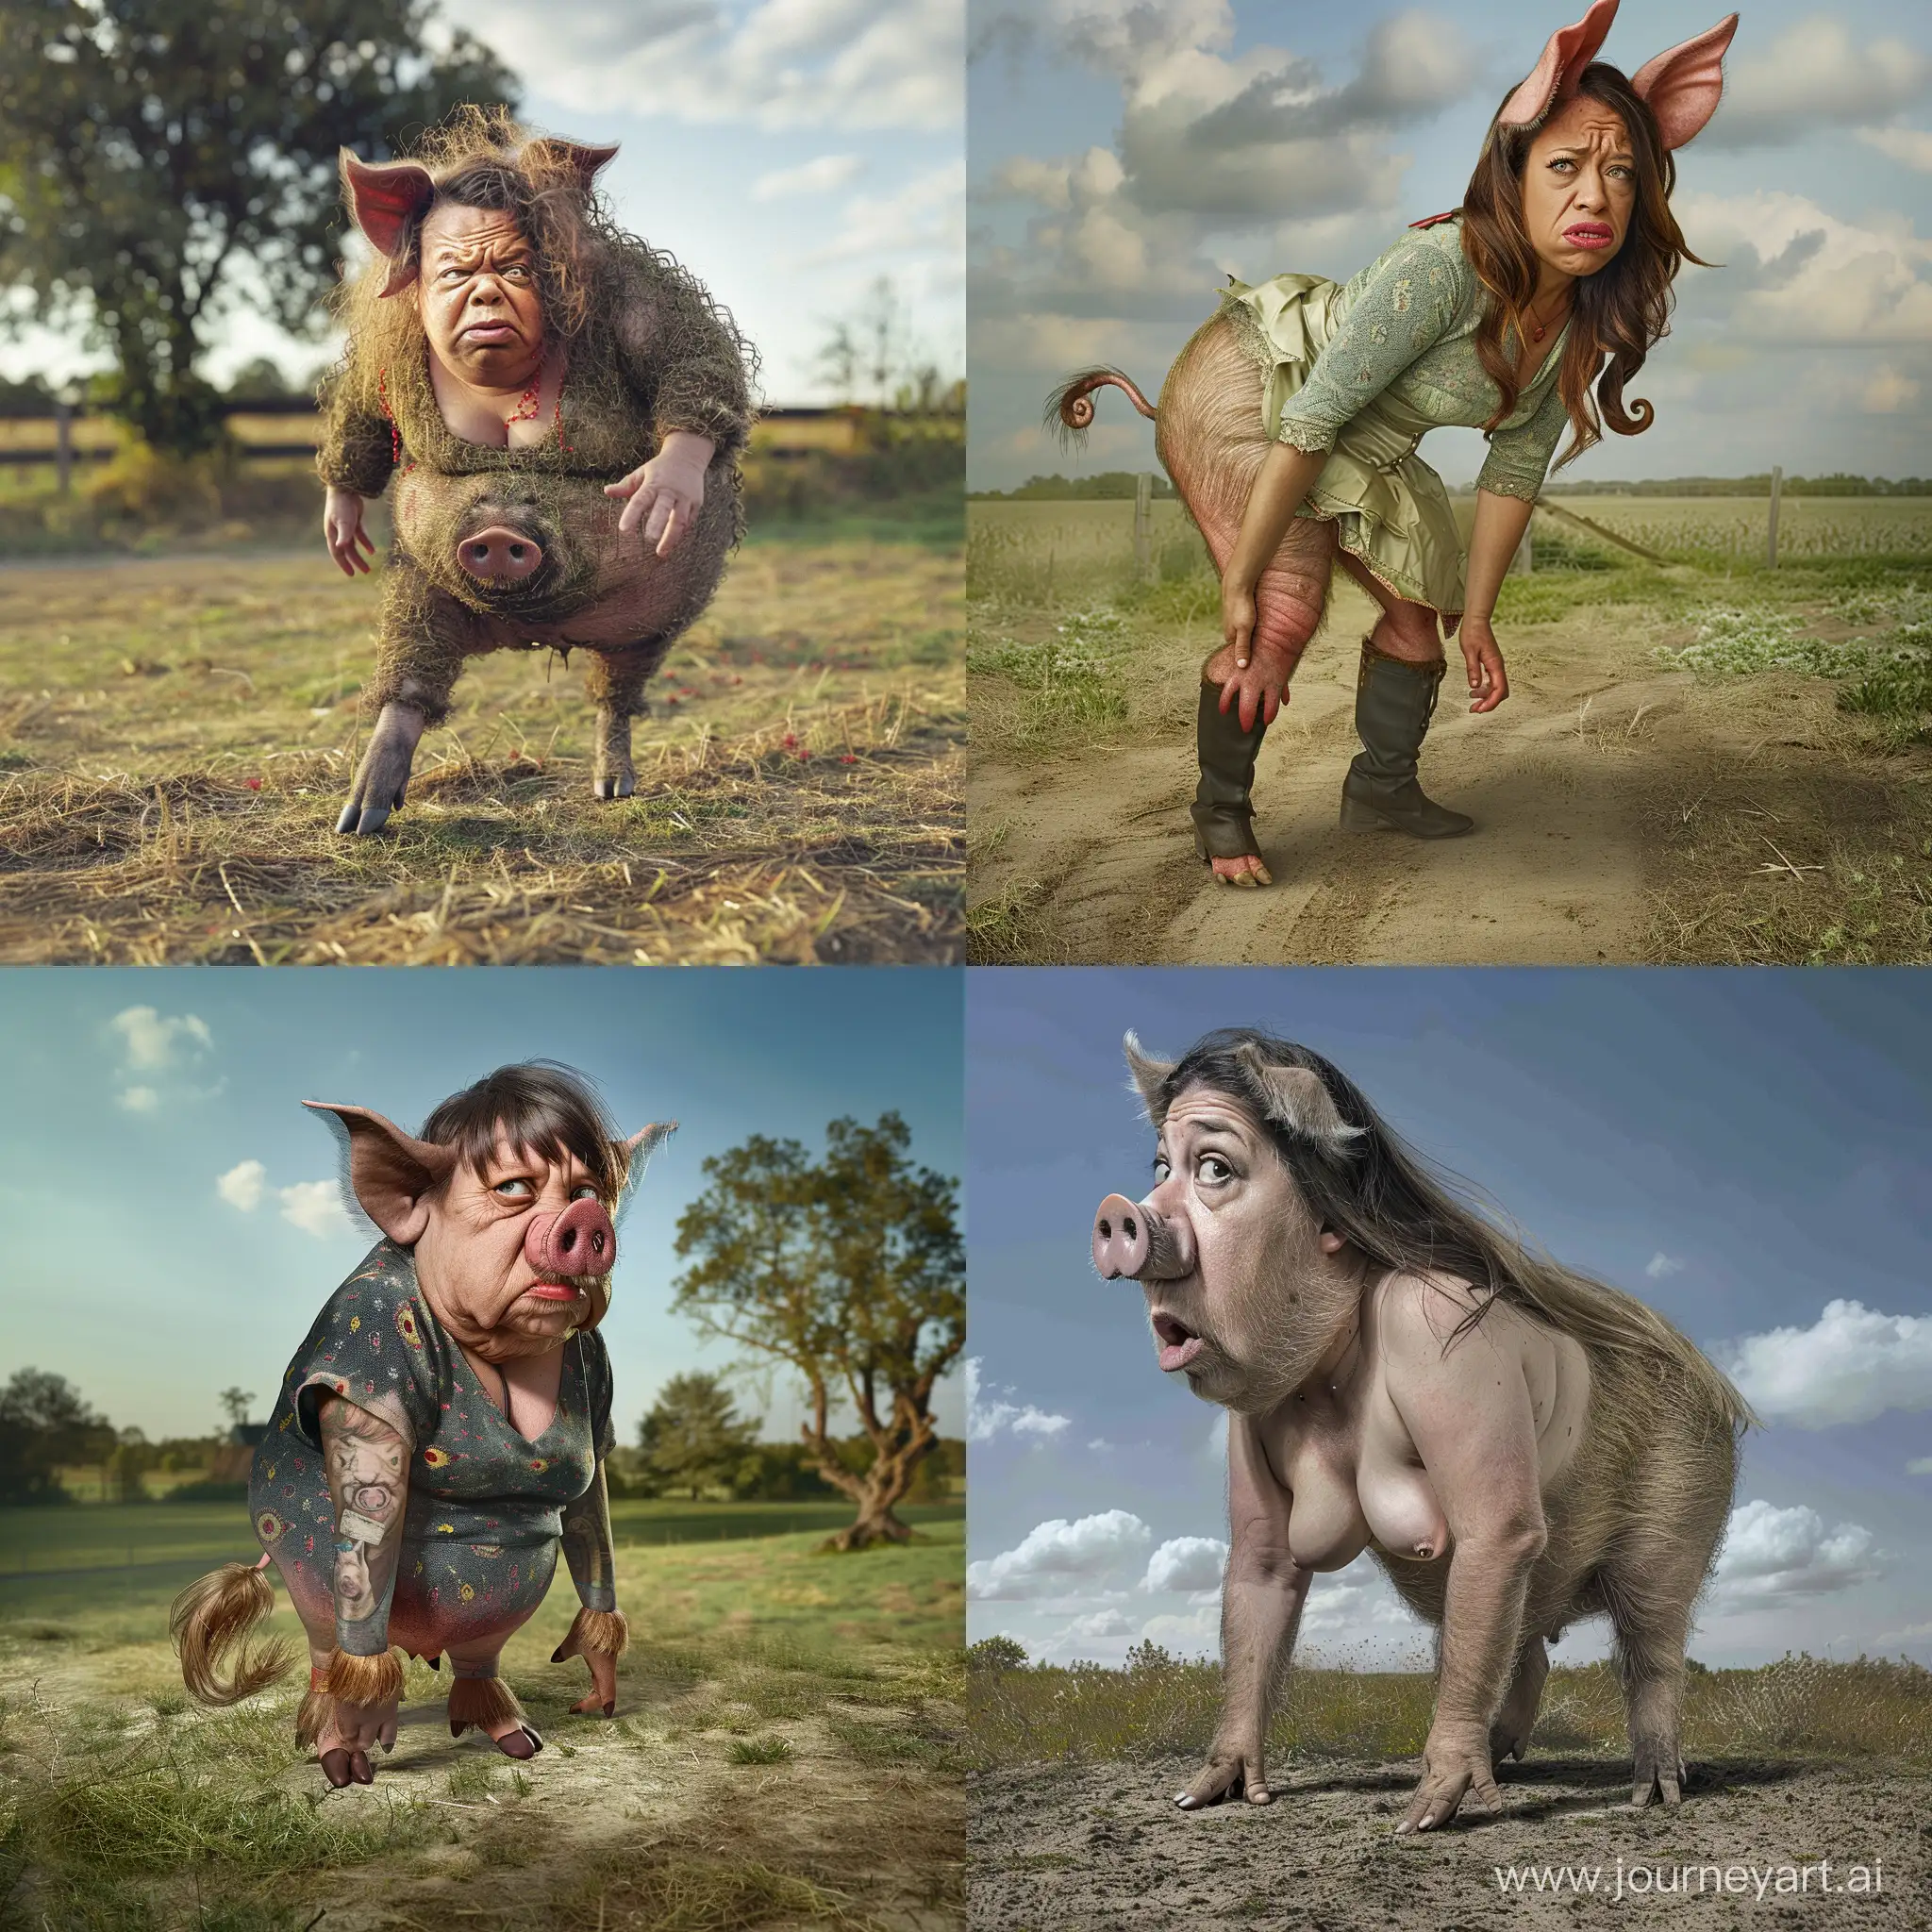 Pig-Transformation-Confused-Woman-with-Hooves-and-Fur-in-Pasture